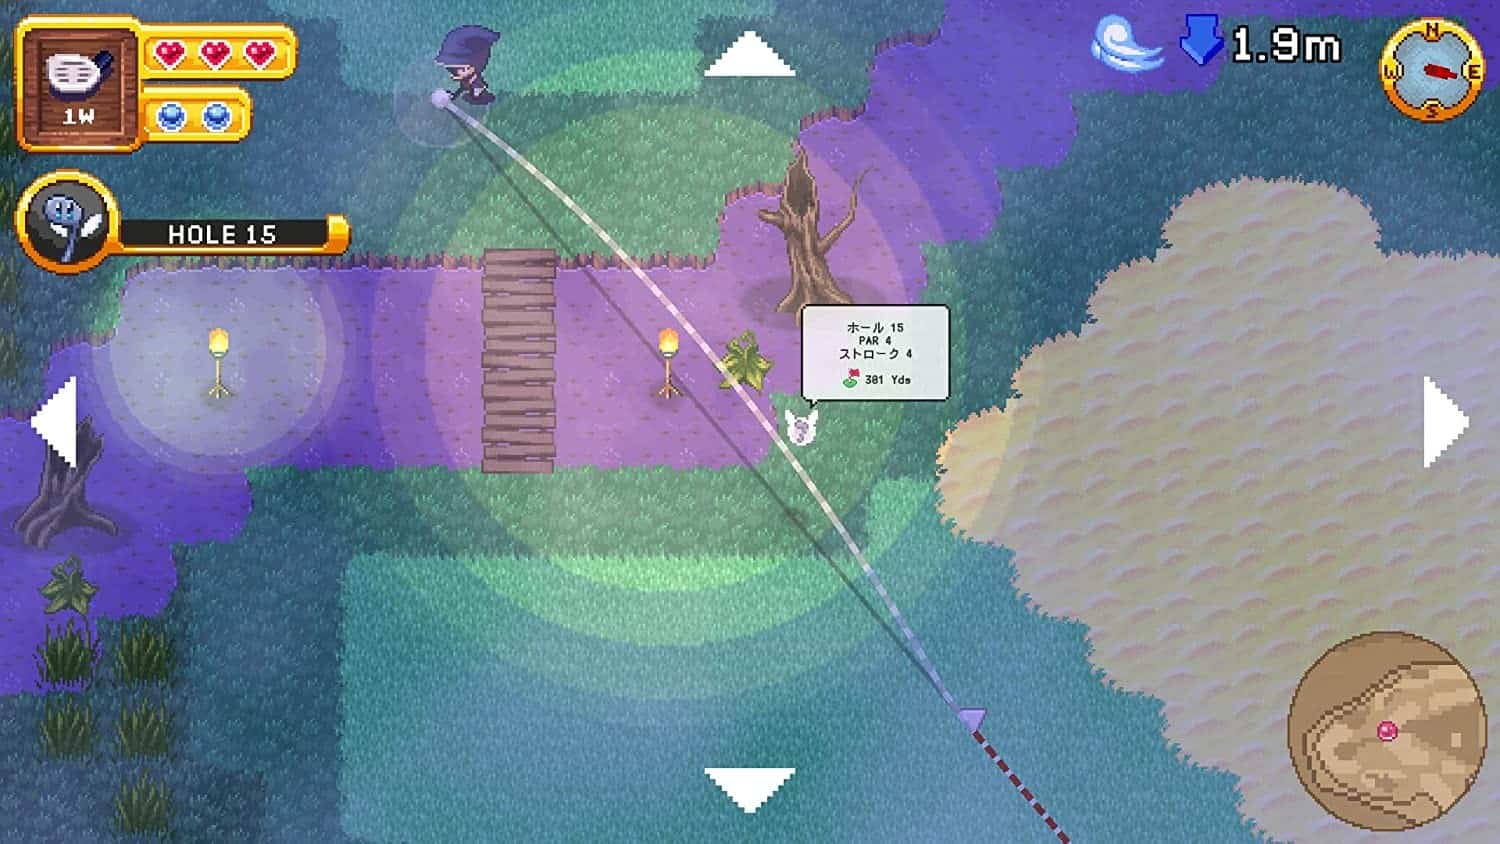 RPGolf Legends Physical JP Version With English Language Support